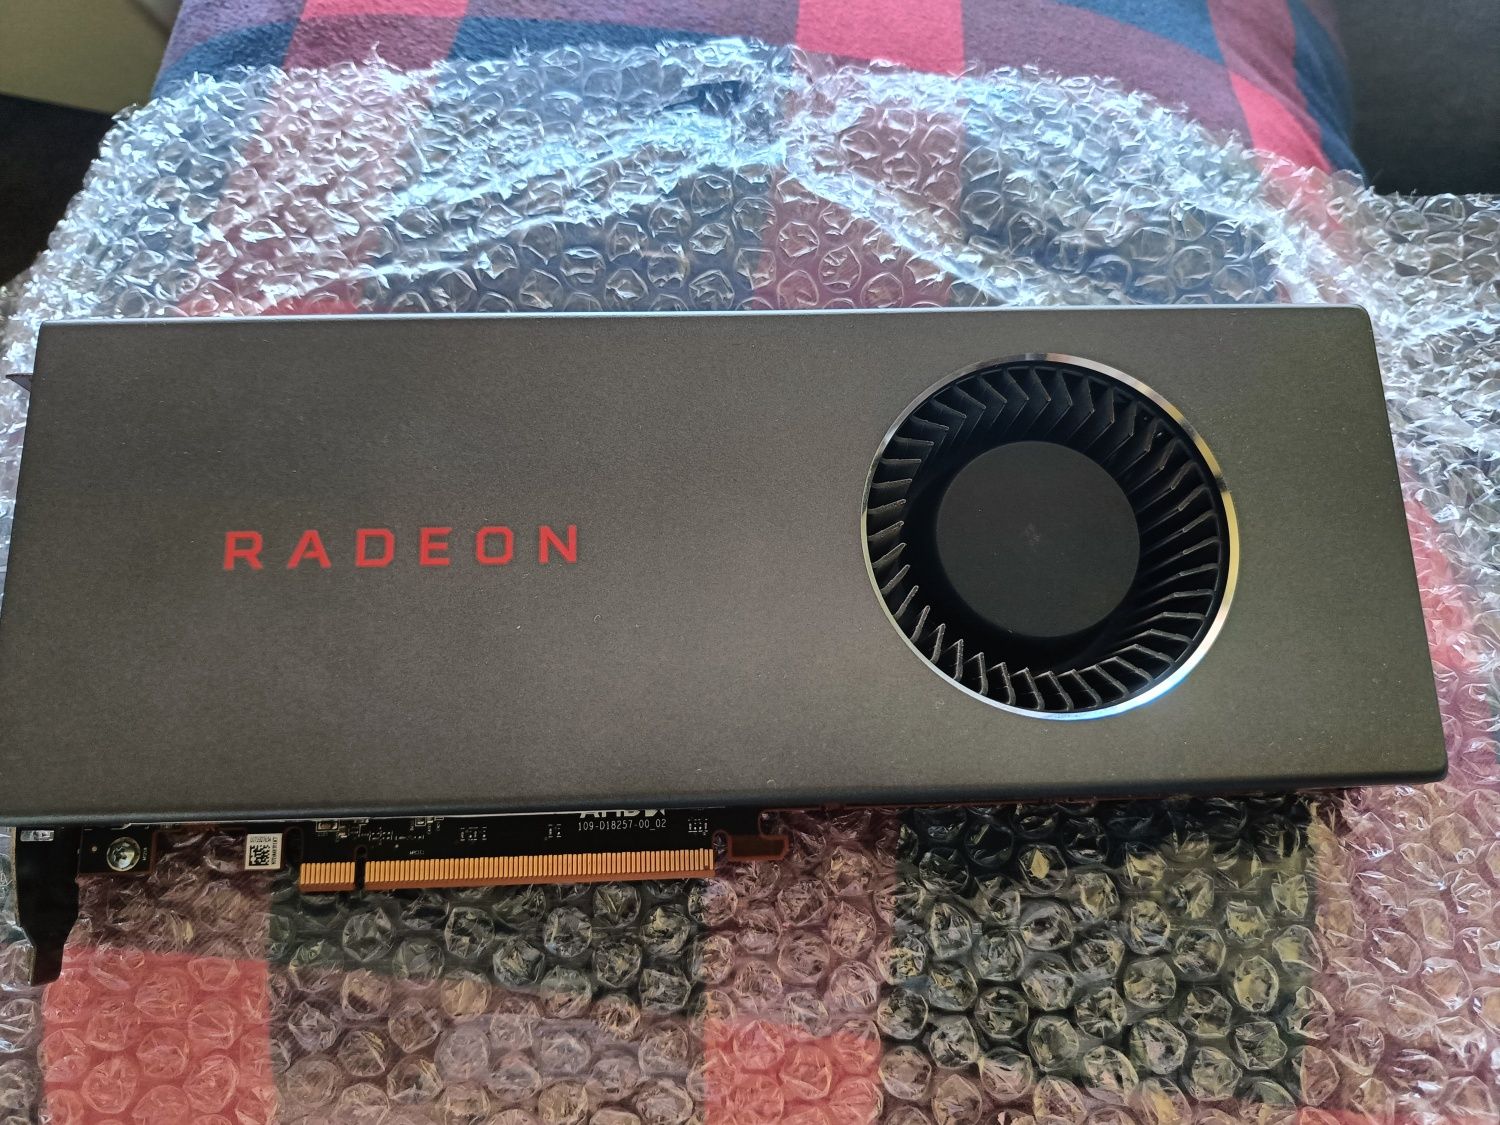 Rx5700 reference